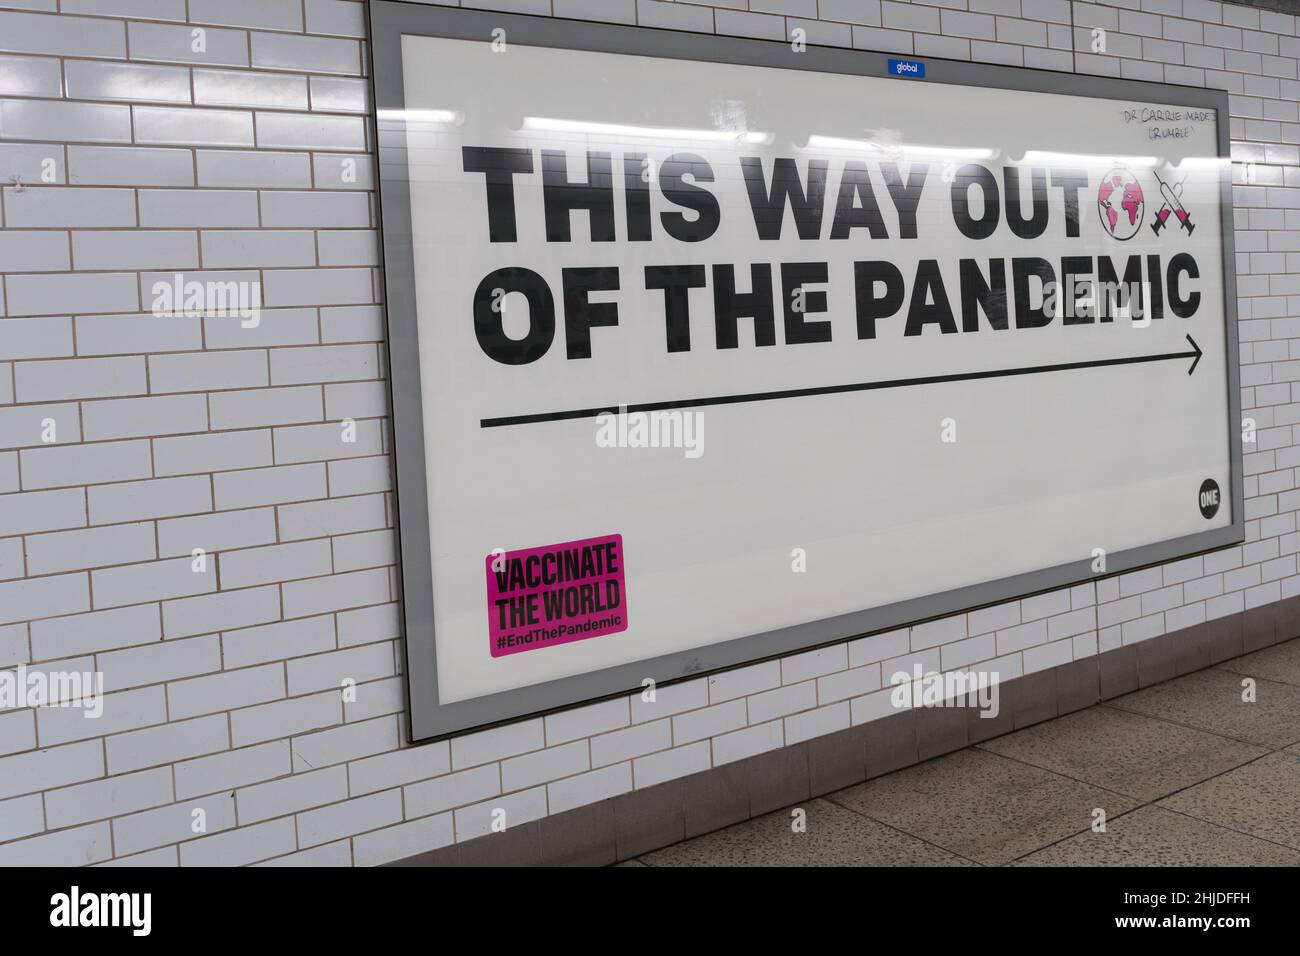 huge poster on the billboard showing 'This way out of the pandemic', England UK self Isolation rules  ending soon Stock Photo